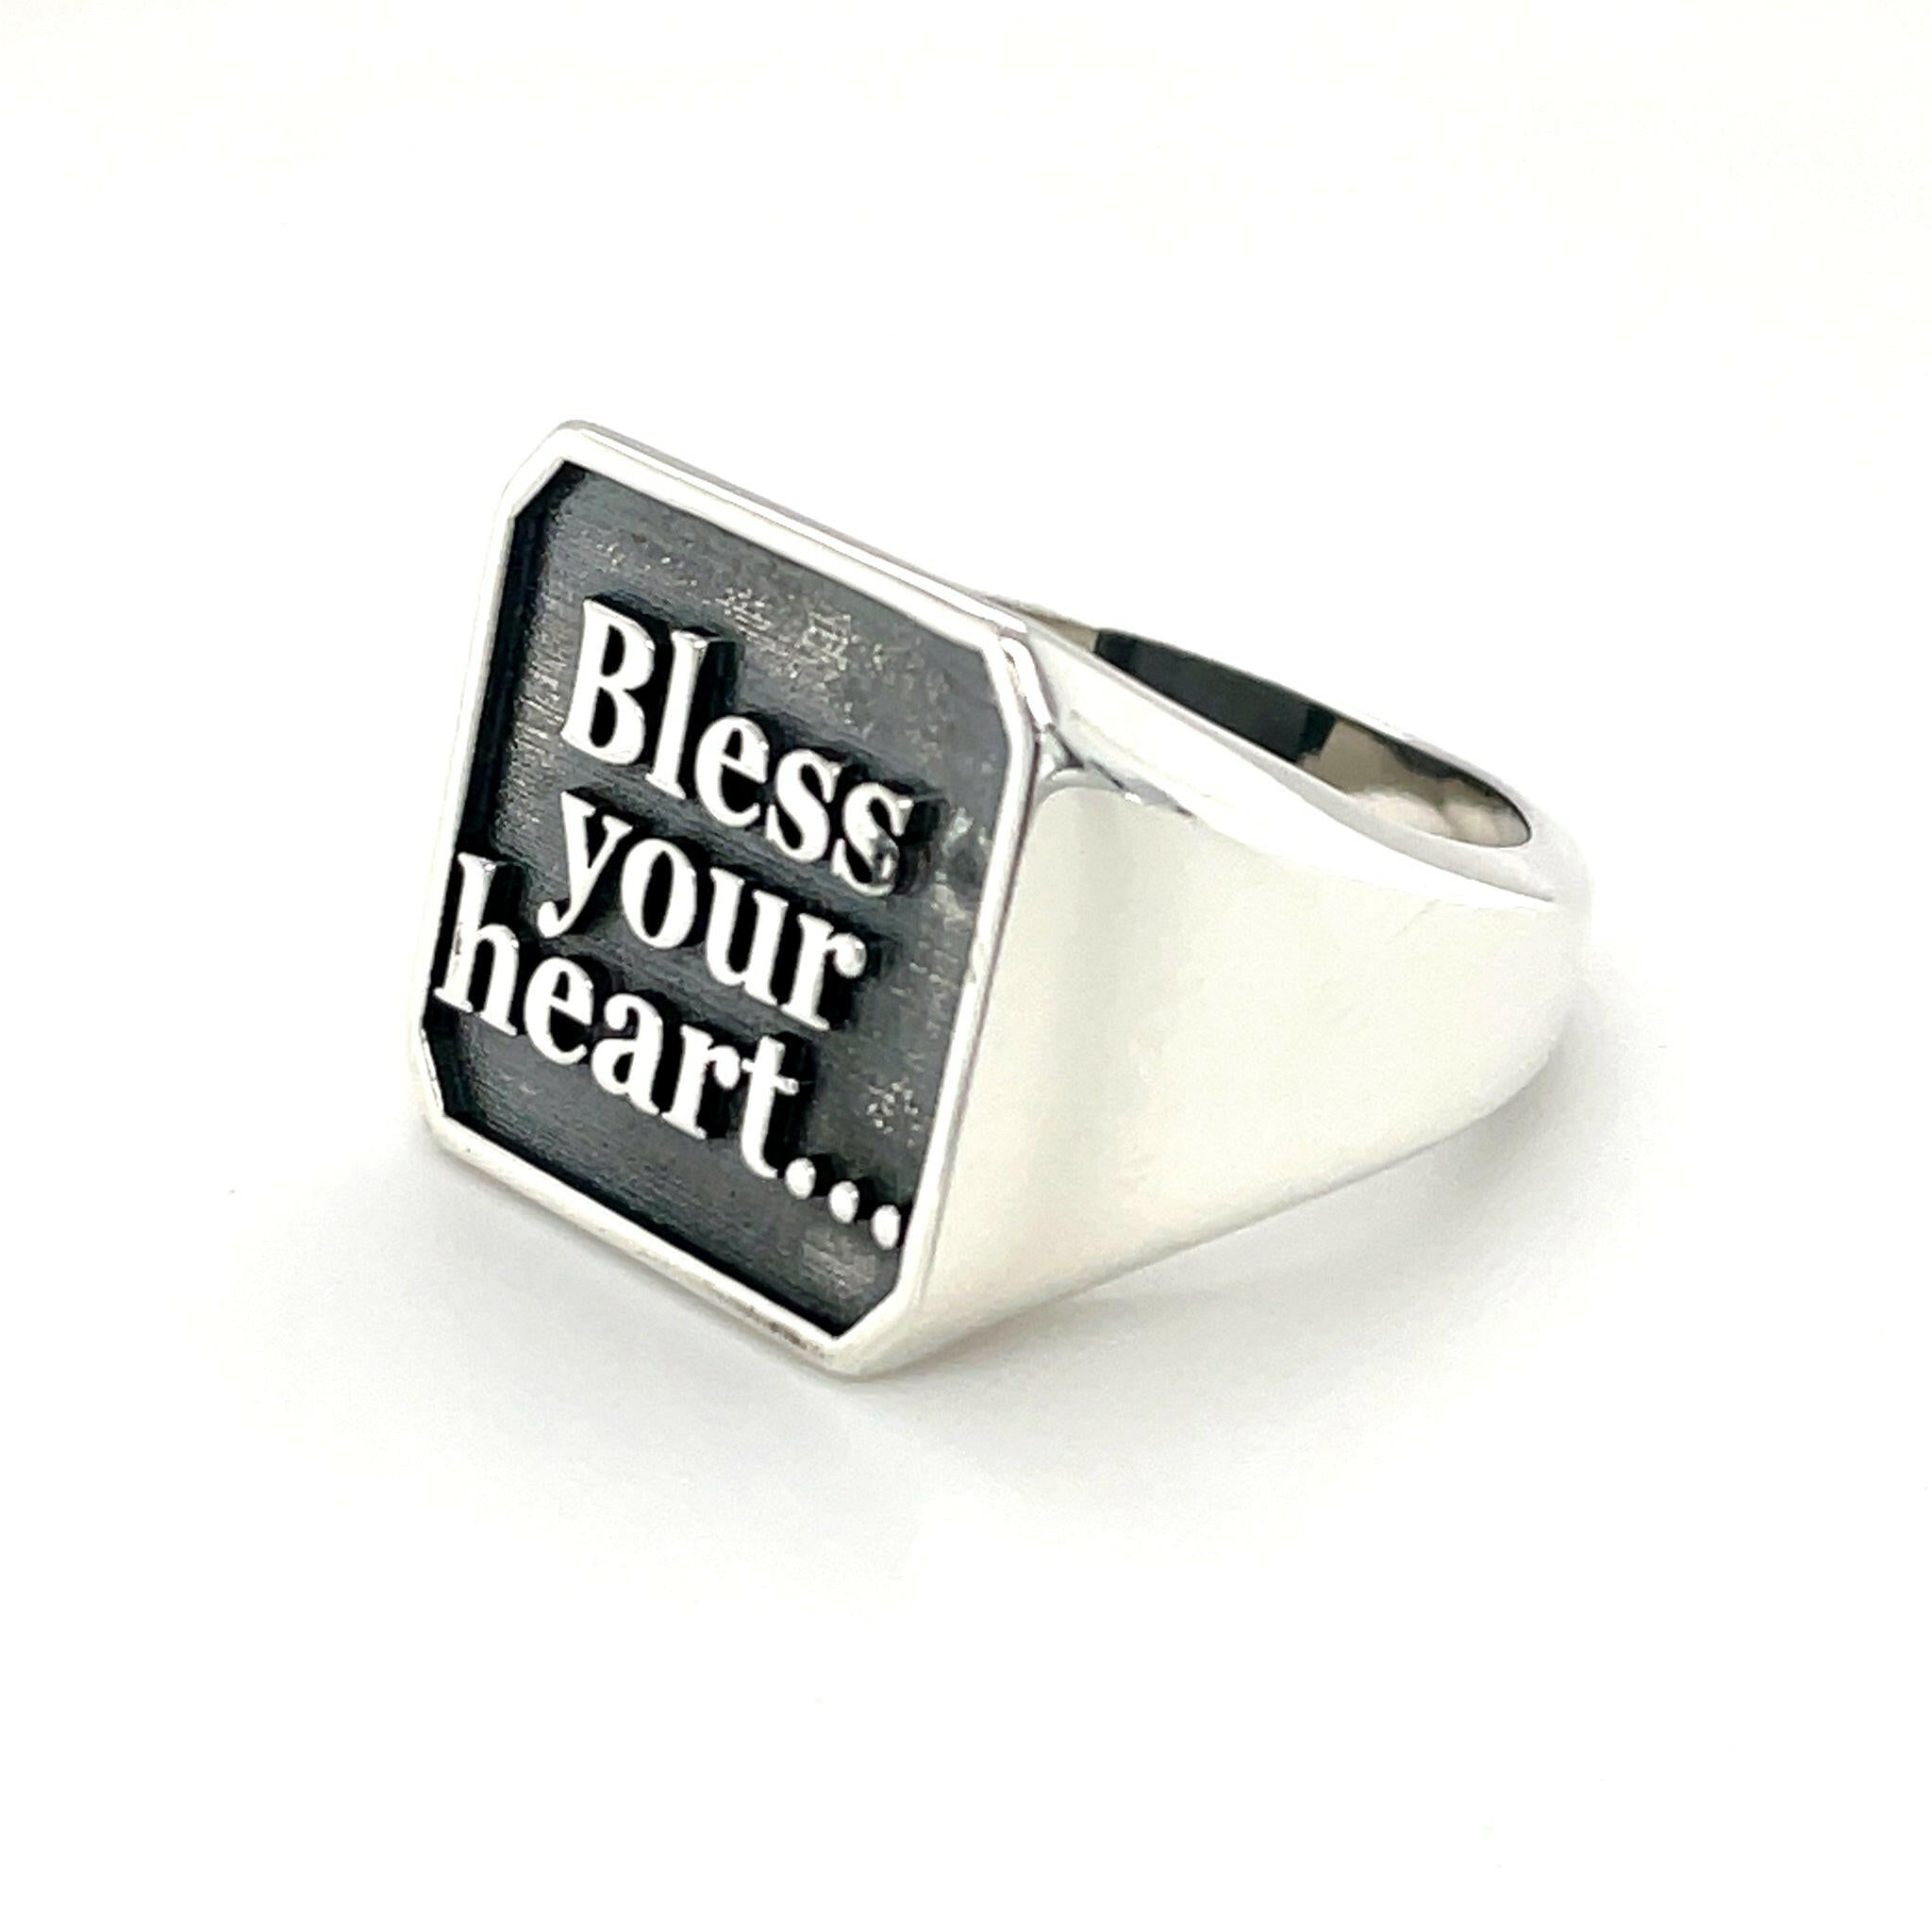 Bless Your Heart(Salty) - Ilah Cibis Jewelry-Rings